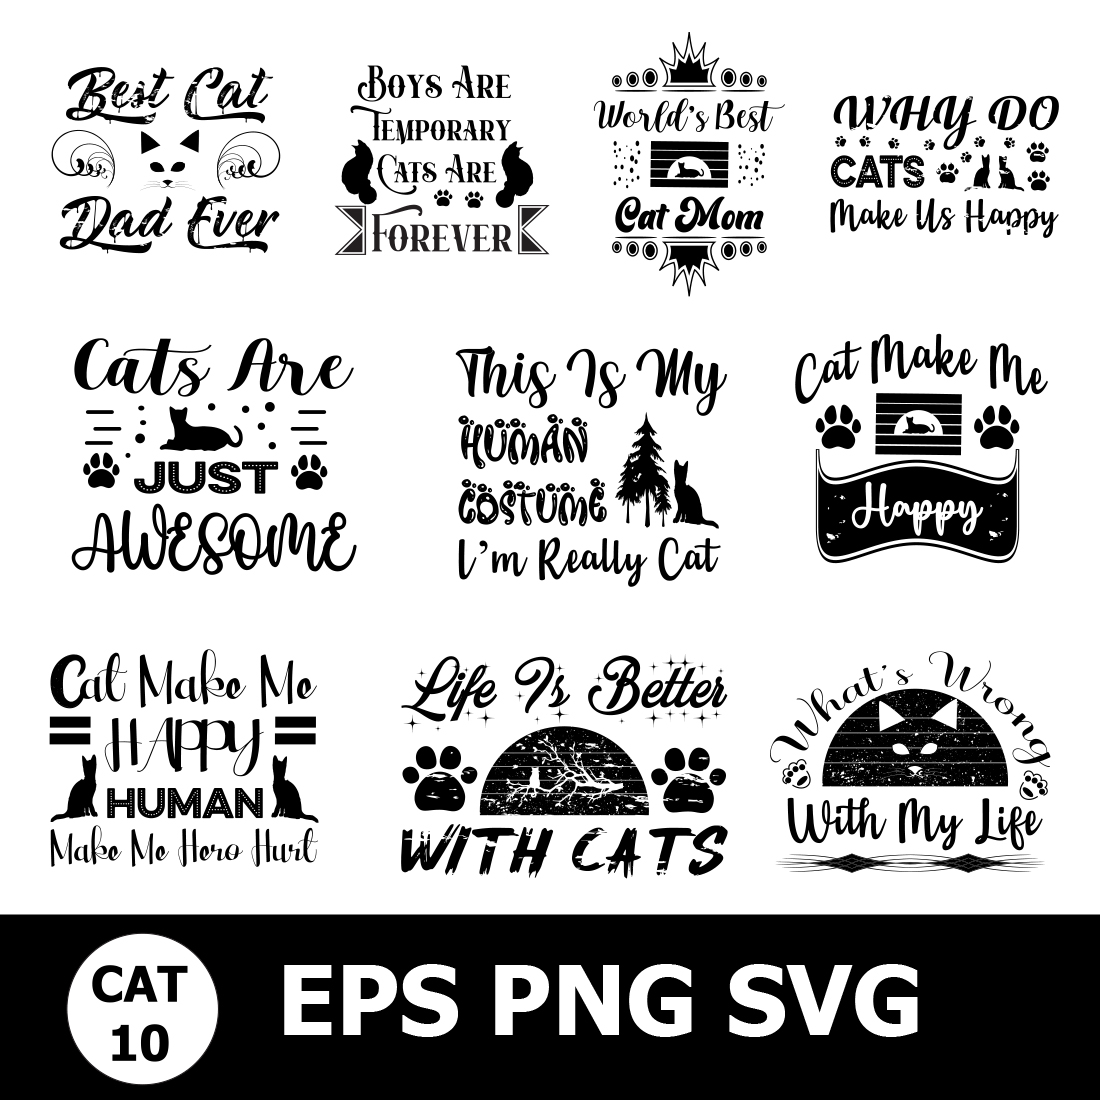 Set of six svg files for a cat svg file.